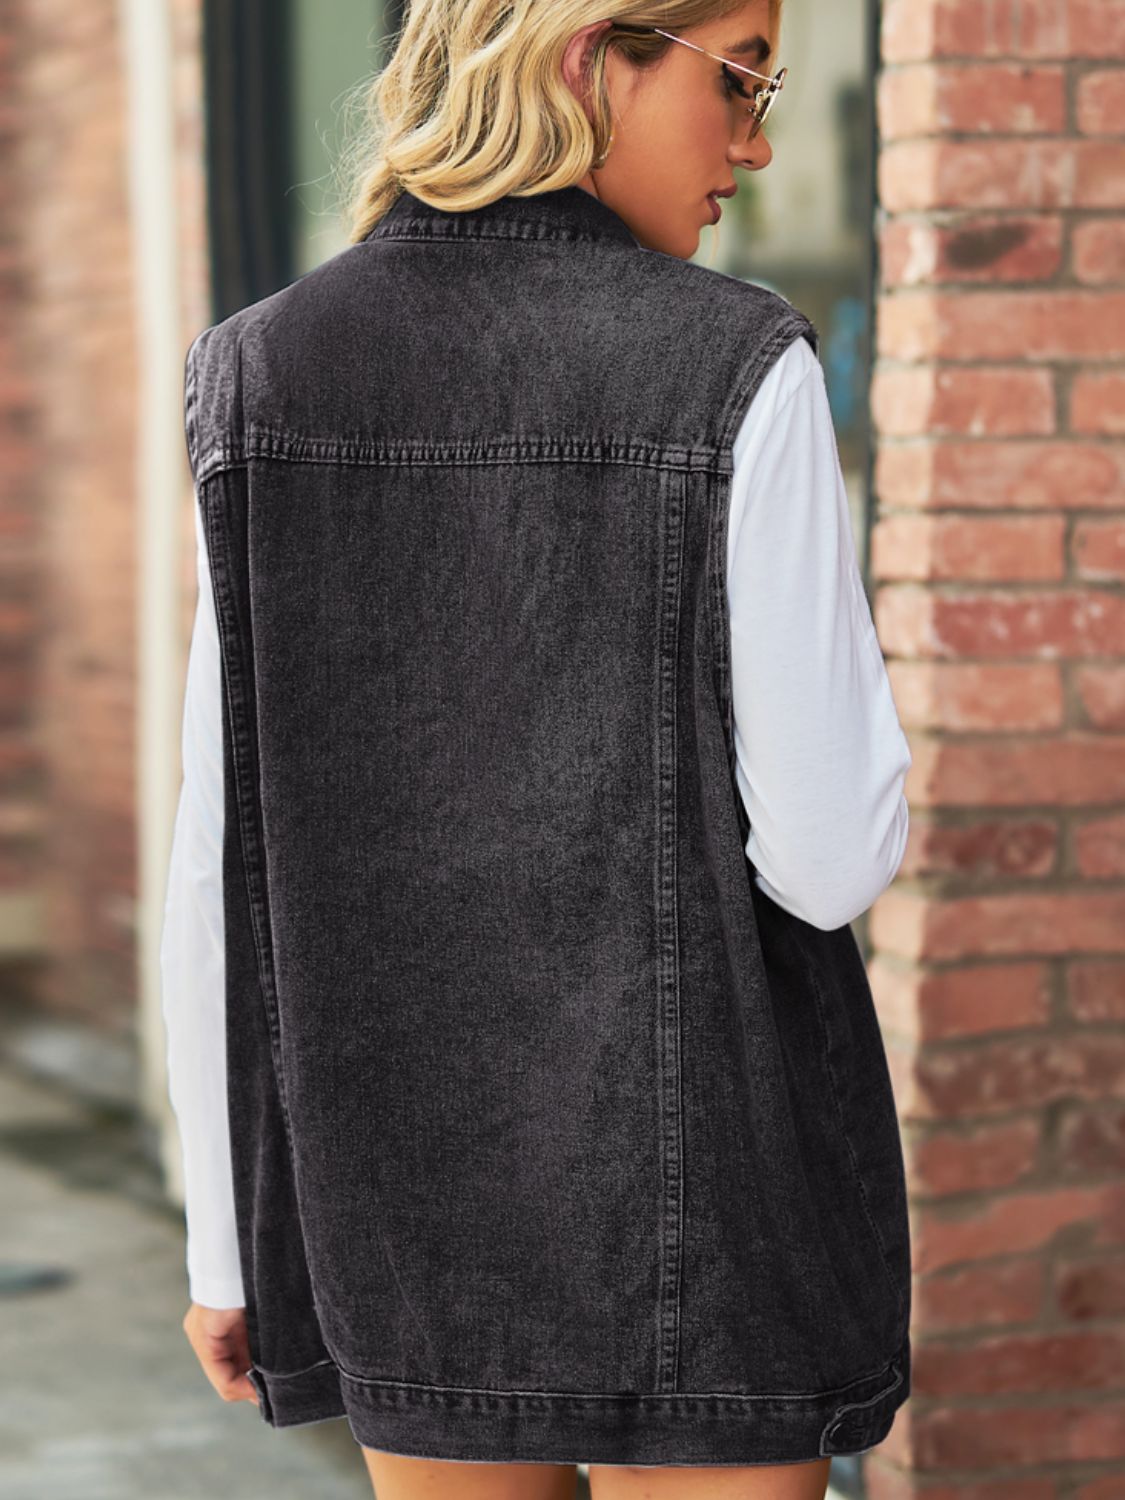 Collared Neck Sleeveless Denim Top with Pockets - nailedmoms